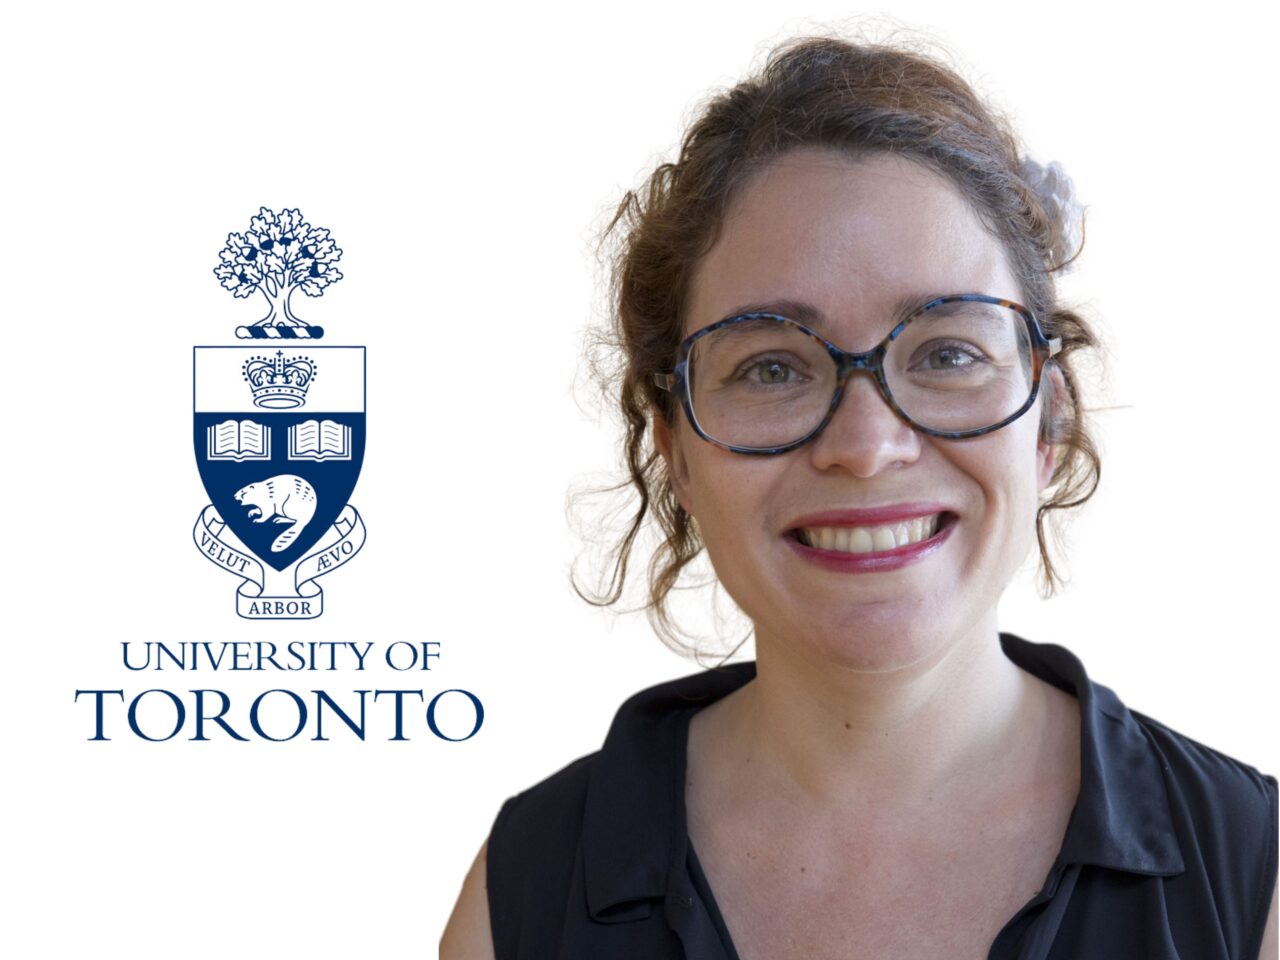 Sarah Cohen-Gogo: I’m starting a new position as Assistant Professor at University of Toronto